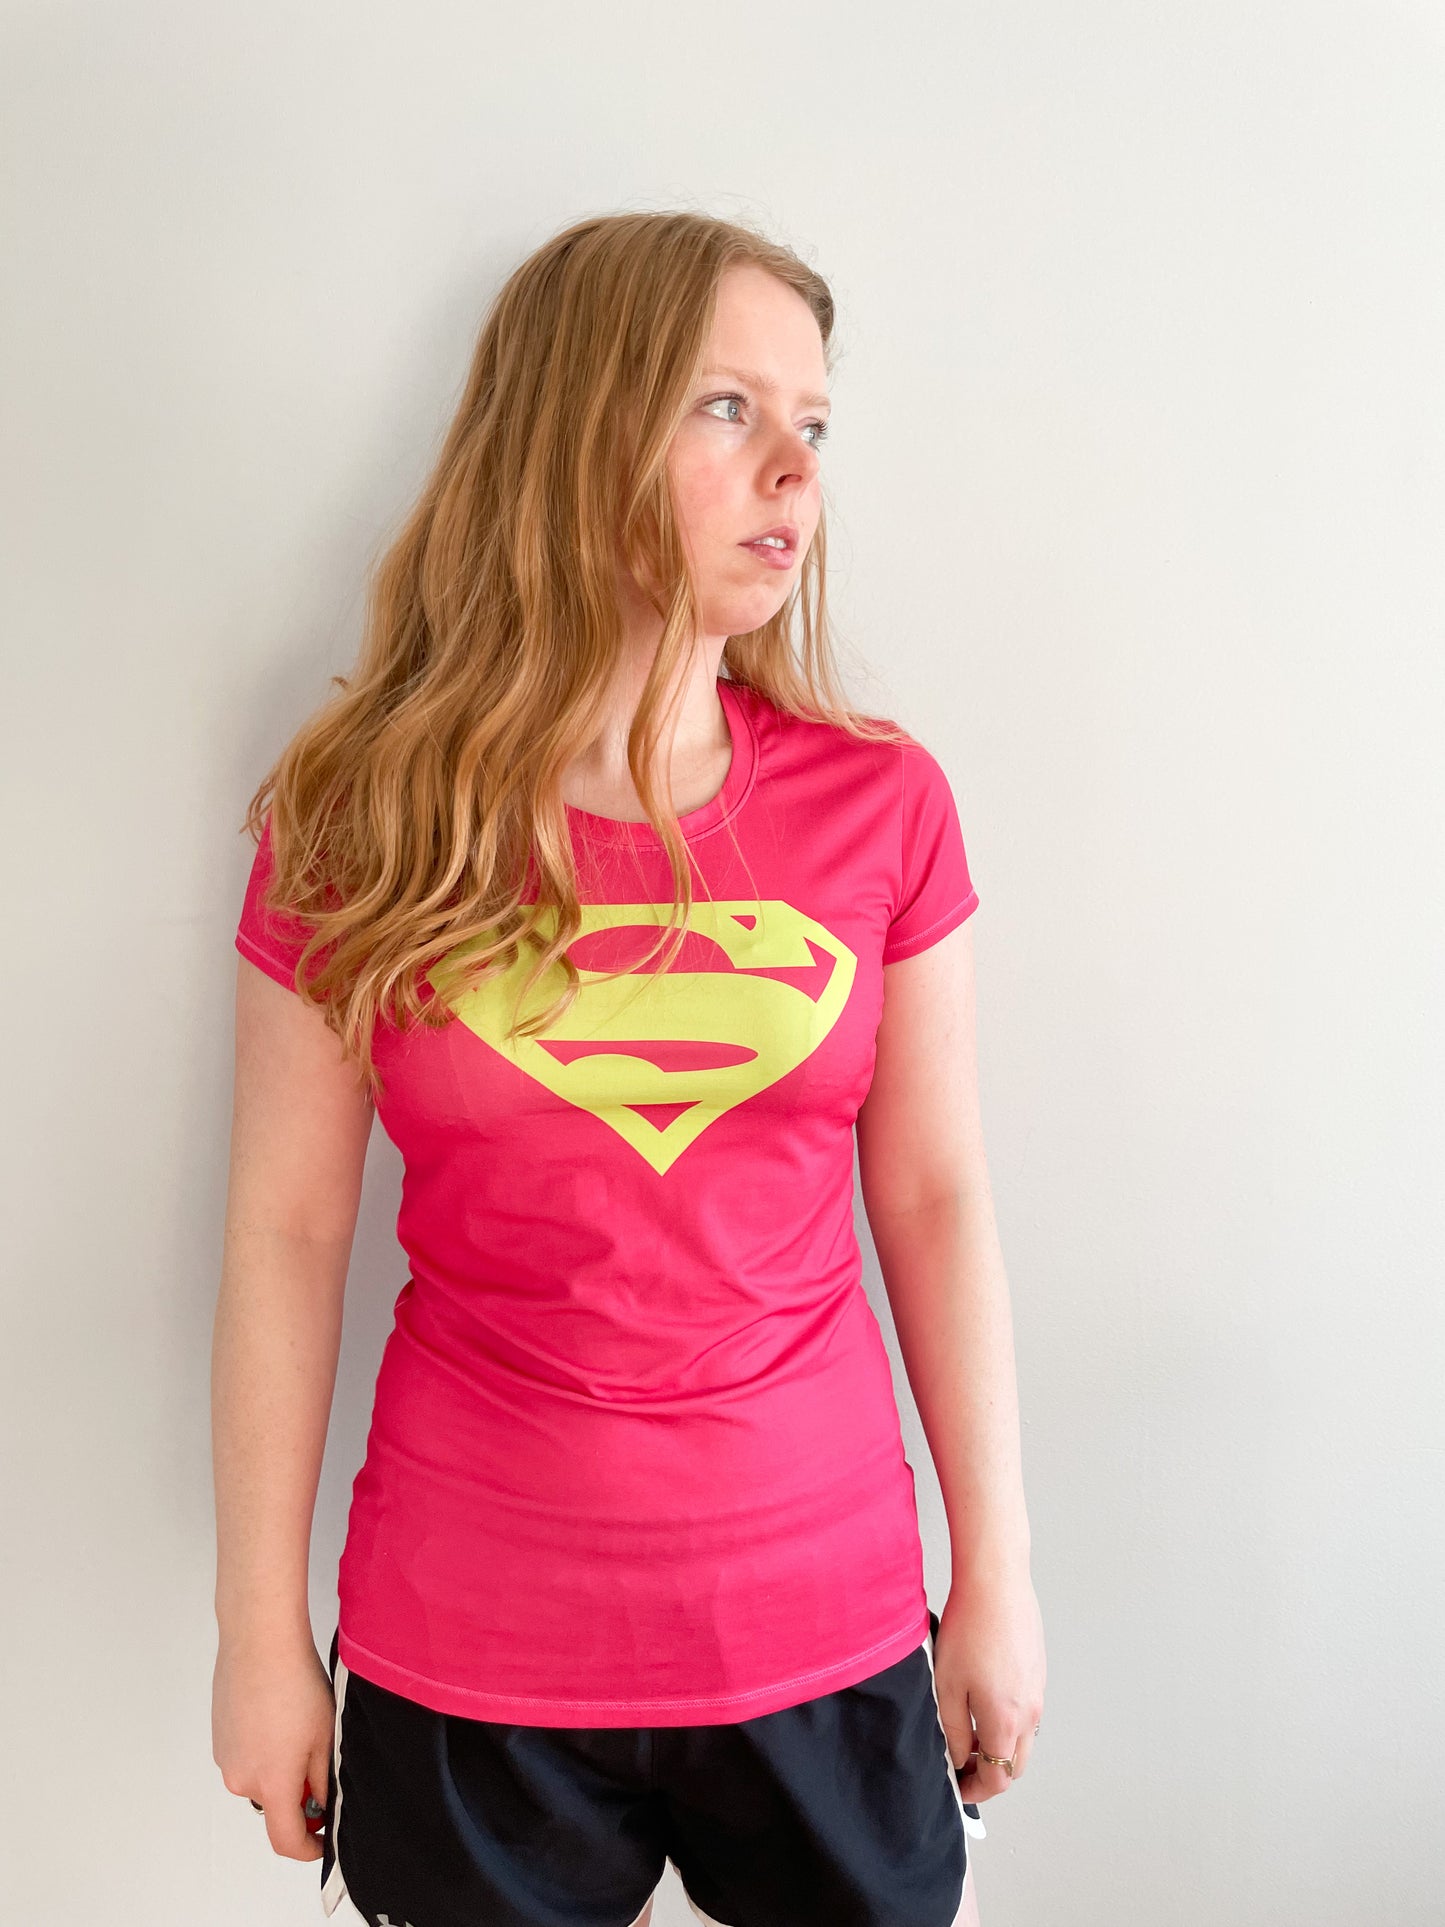 Superman "Supergirl" Under Armour Workout T-Shirt - Small